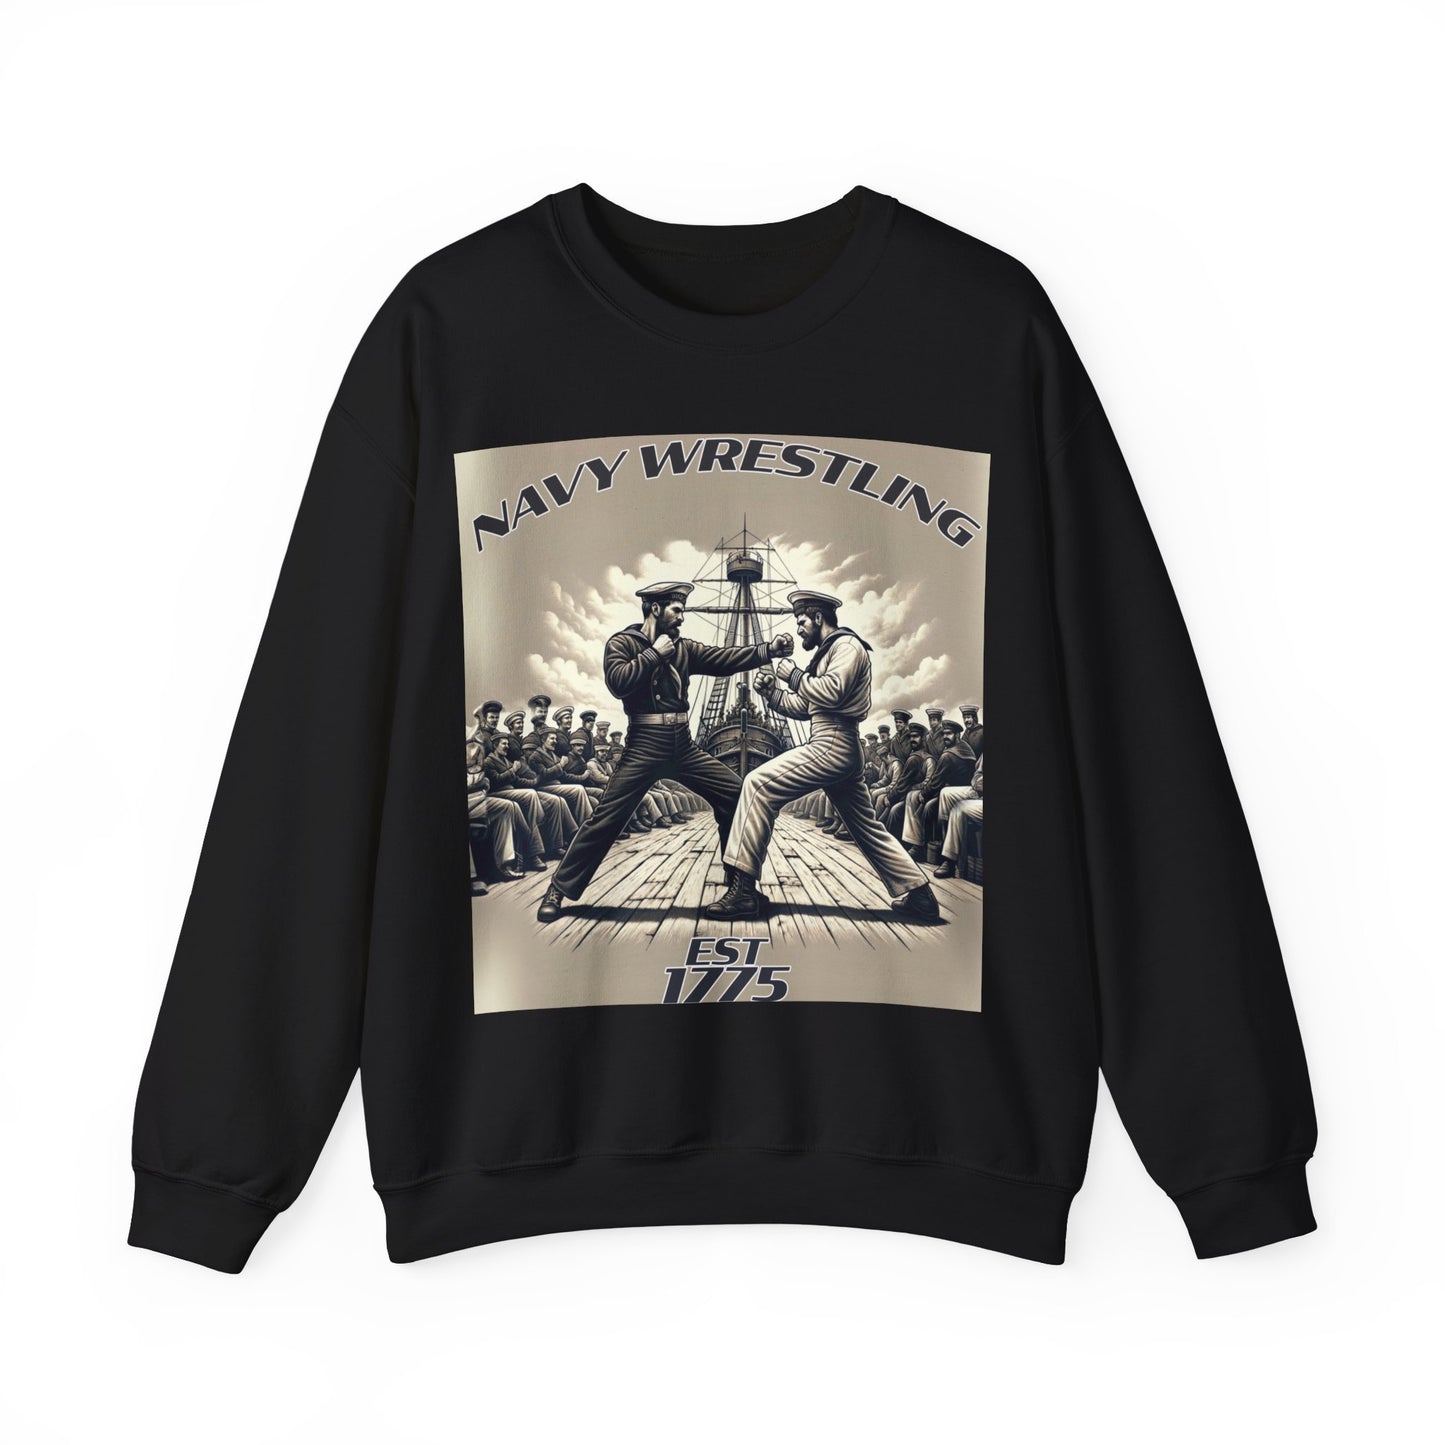 🎖️ **Limited Edition Navy Wrestling Crew Neck Sweater** 🌊